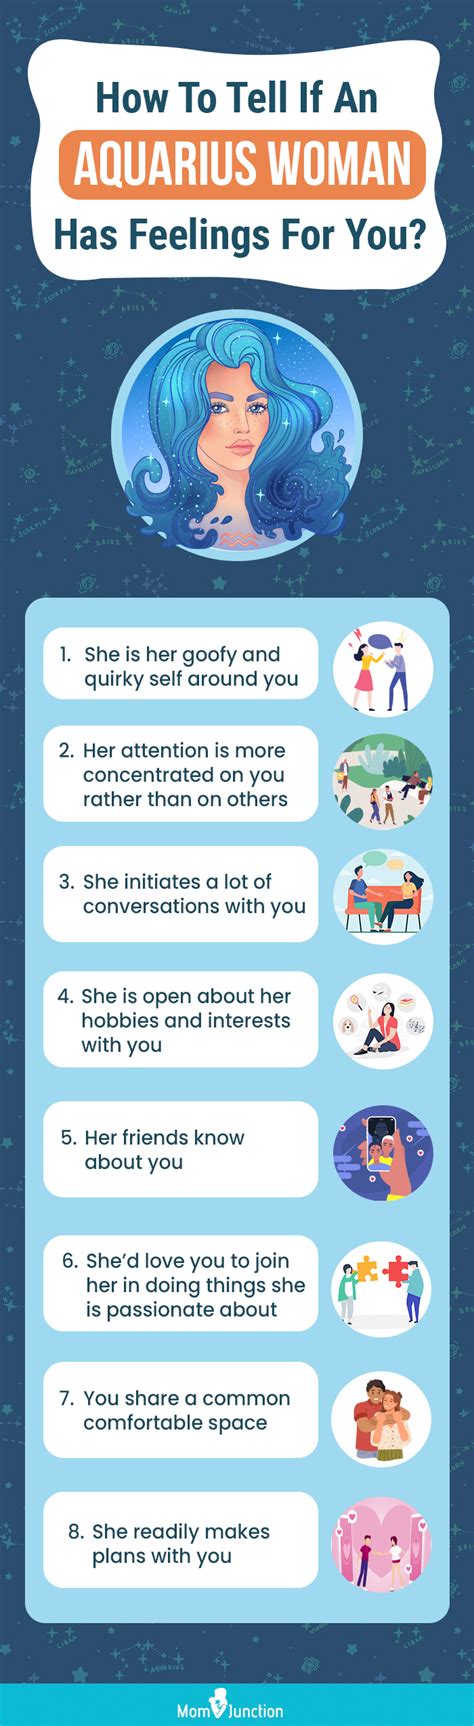 how to connect with an aquarius woman